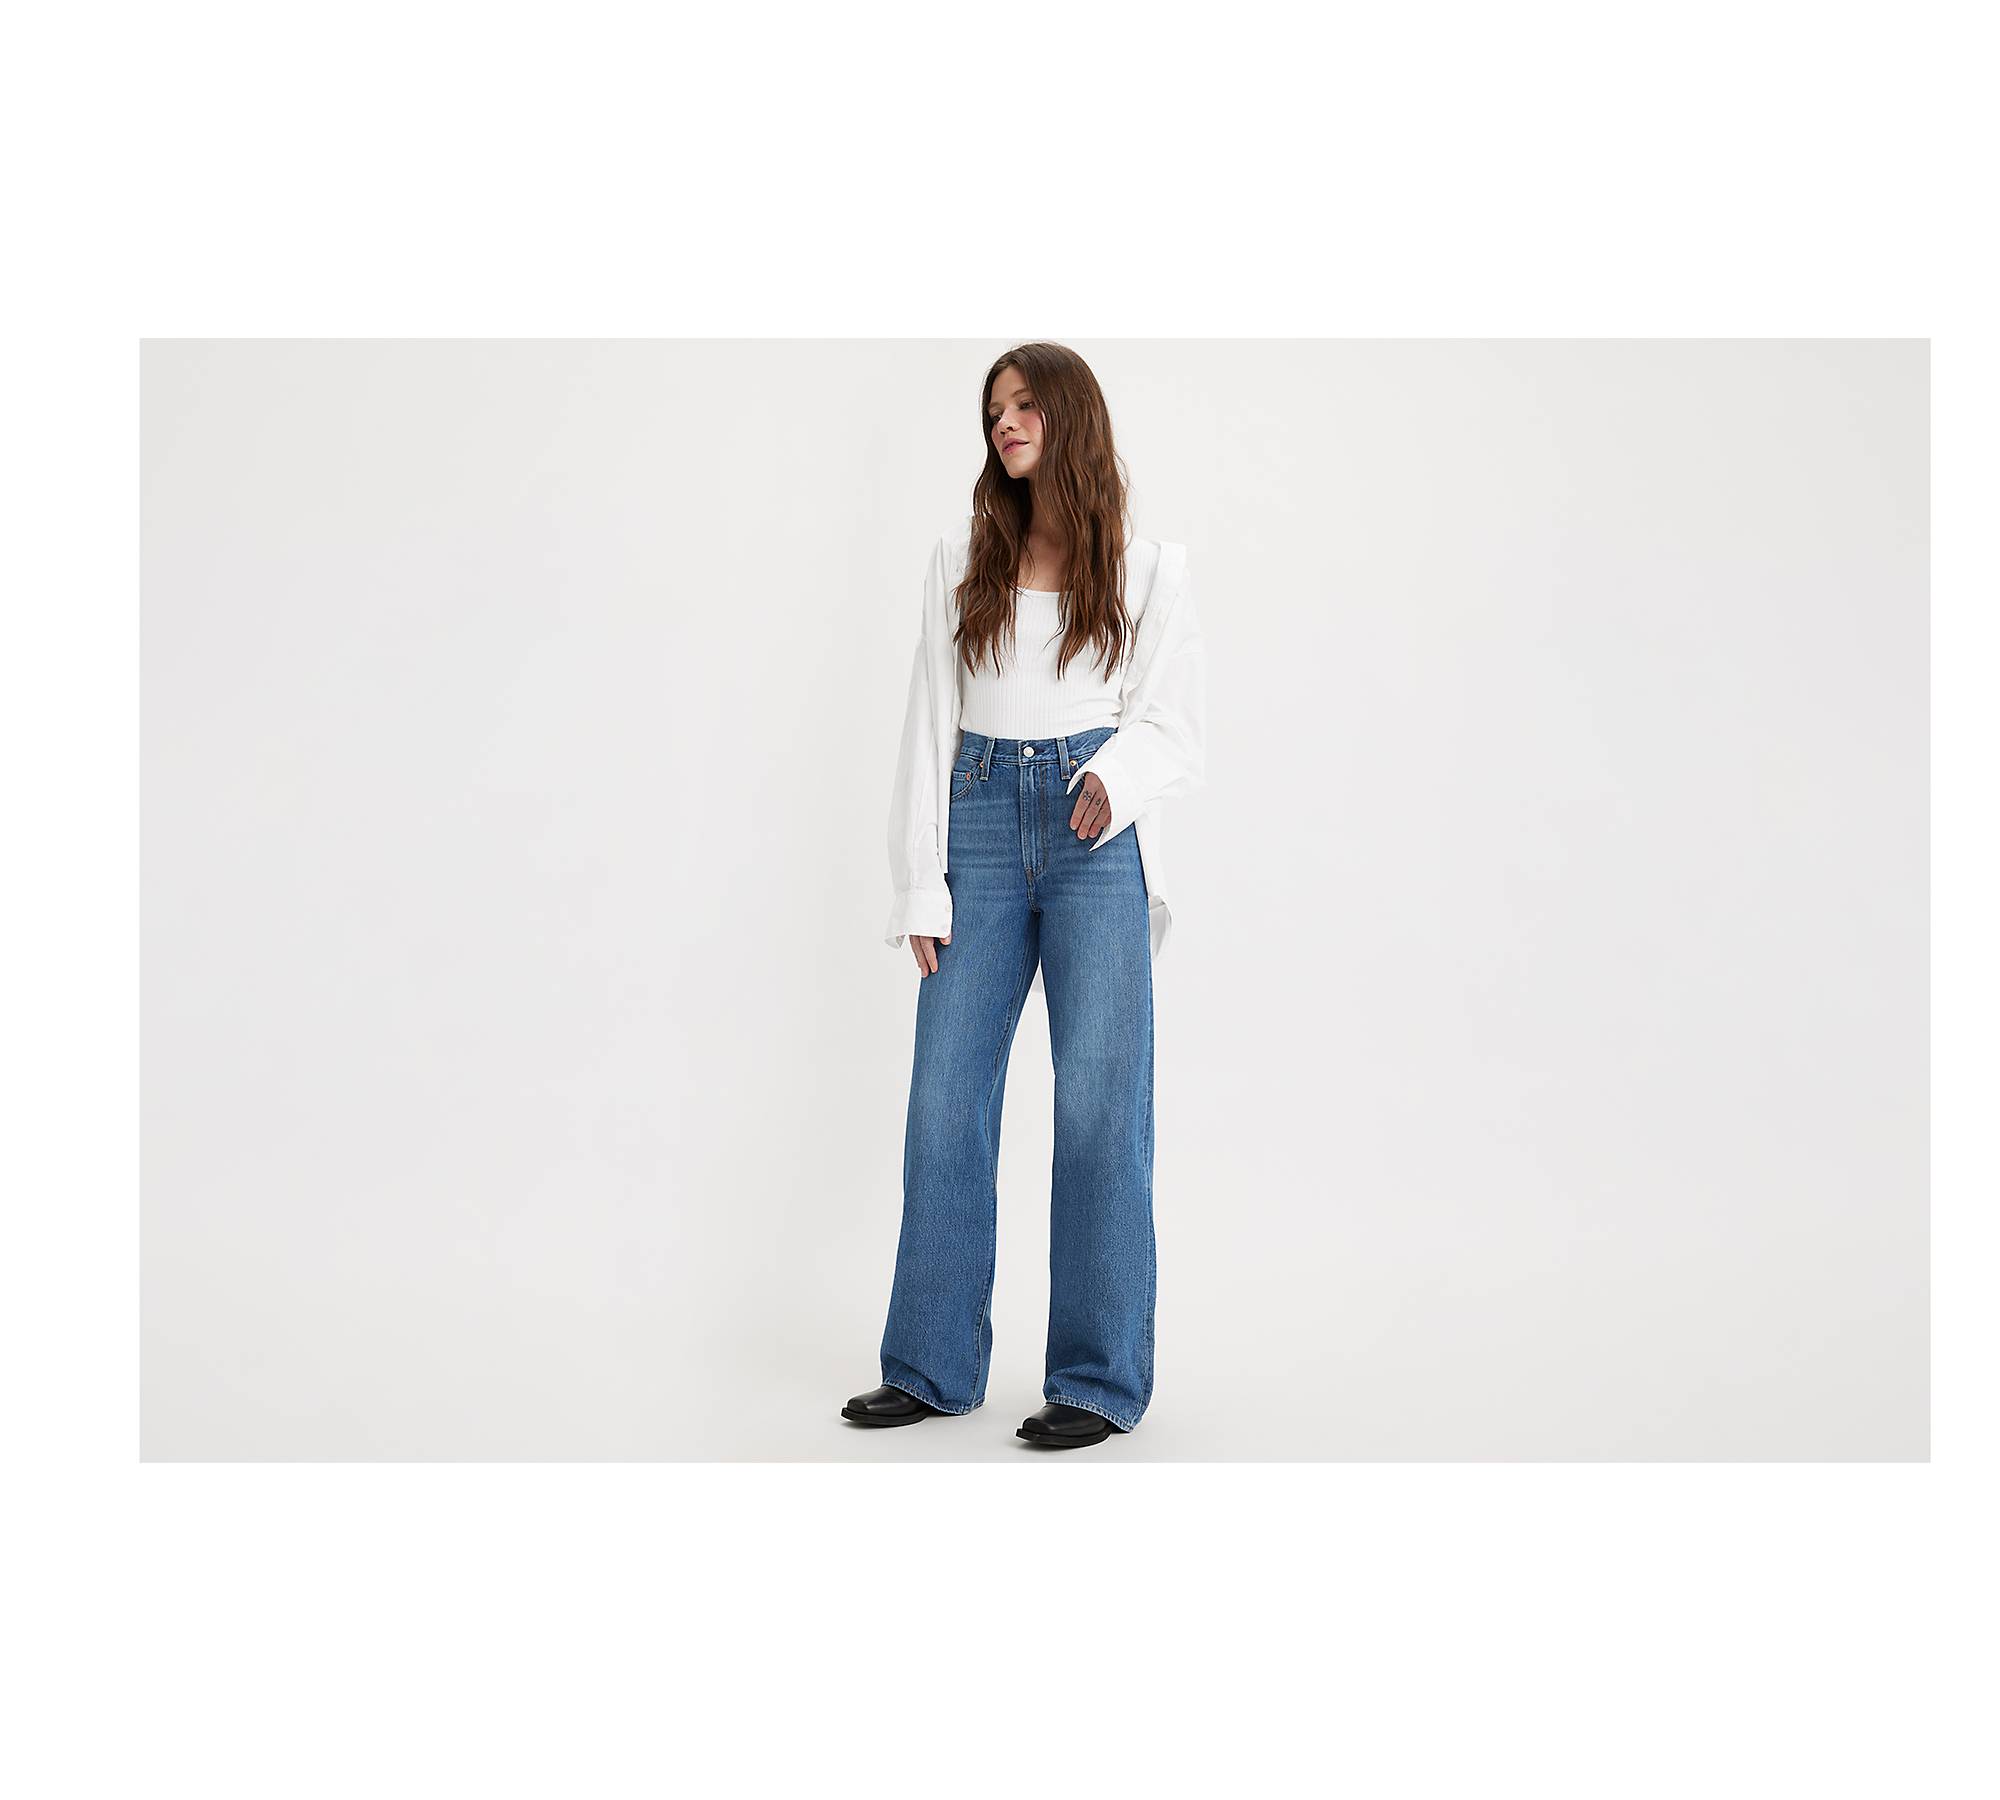 Realsize Women's Stretch Pull On Pants with Pockets 